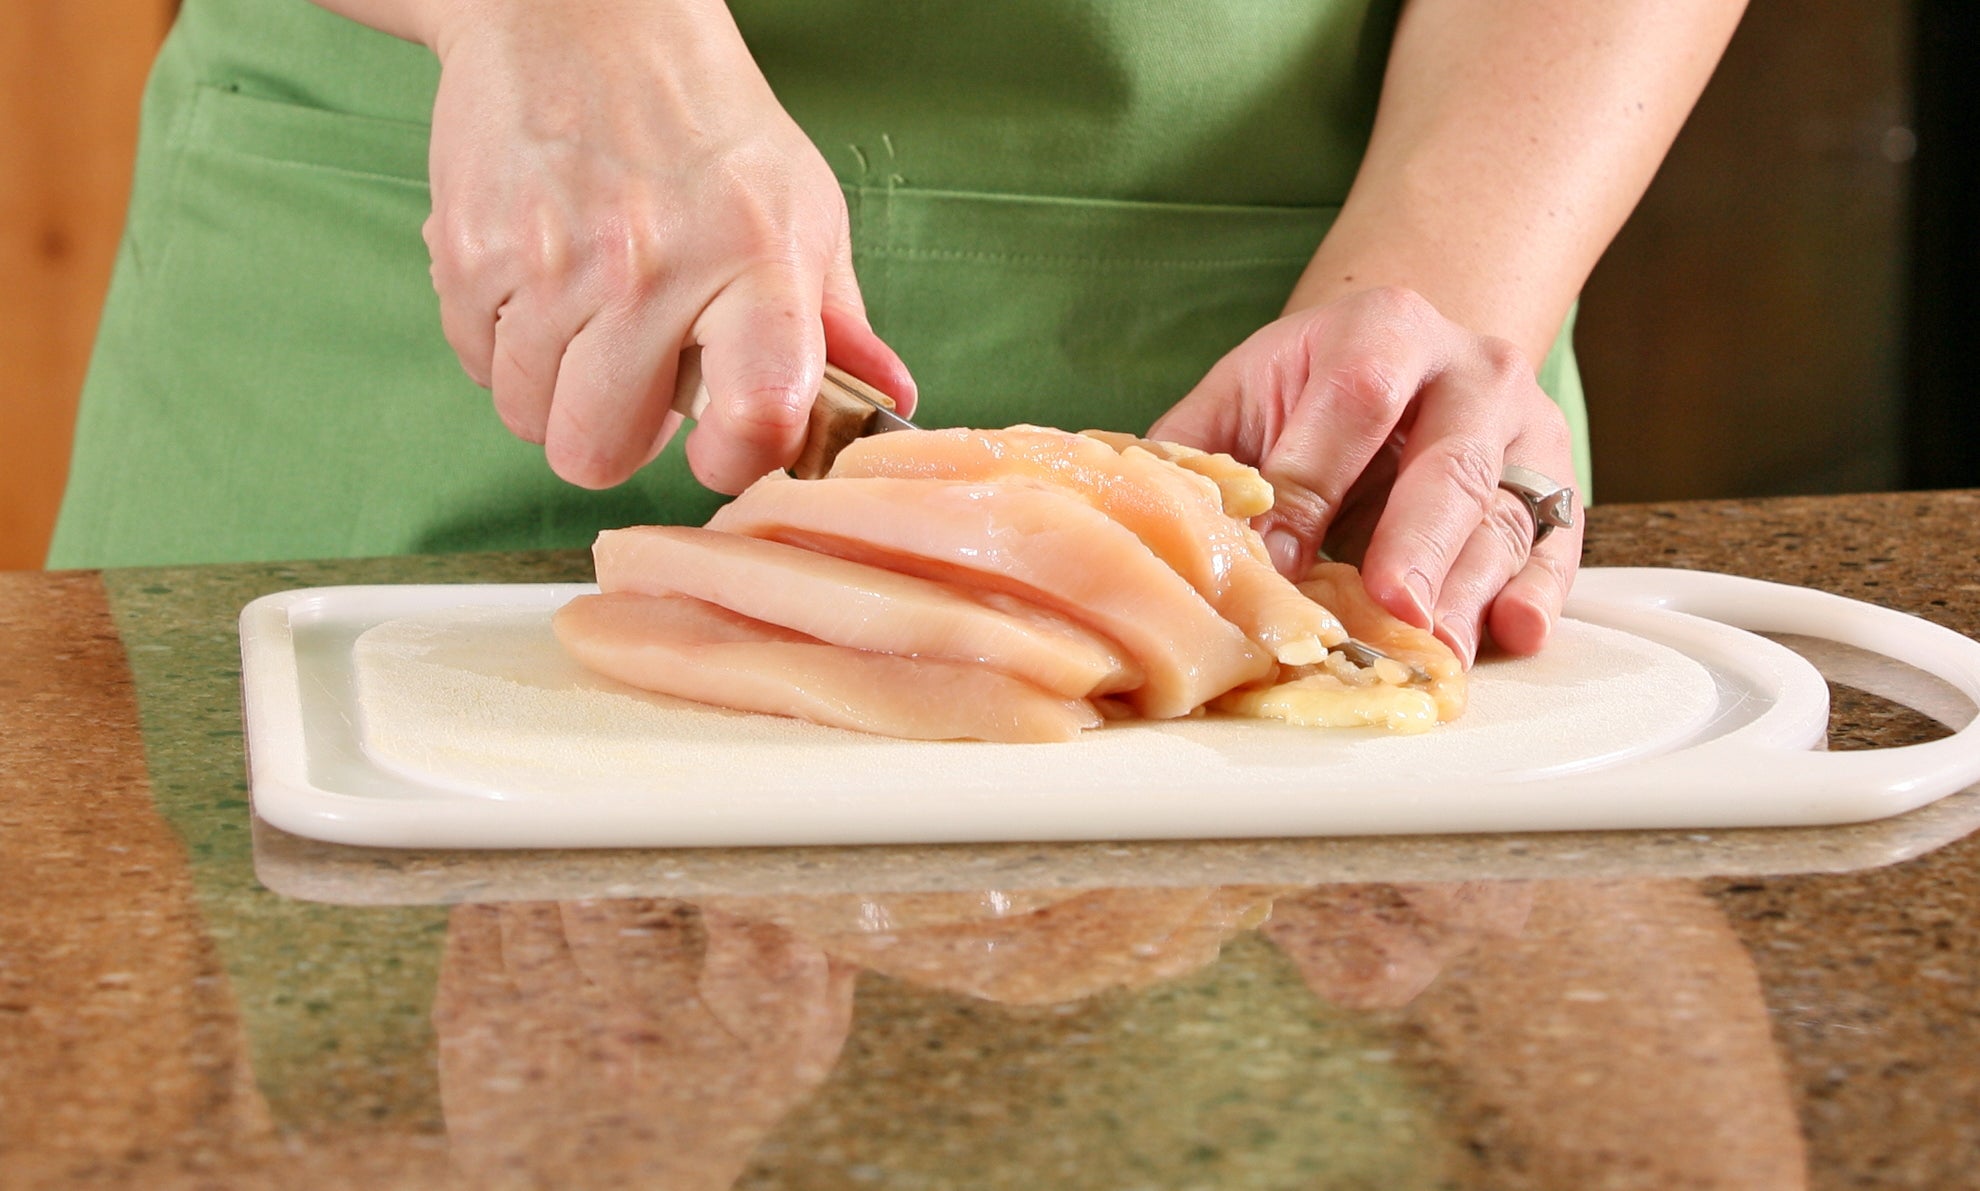 Slicing raw chicken and other ingredients for a meal